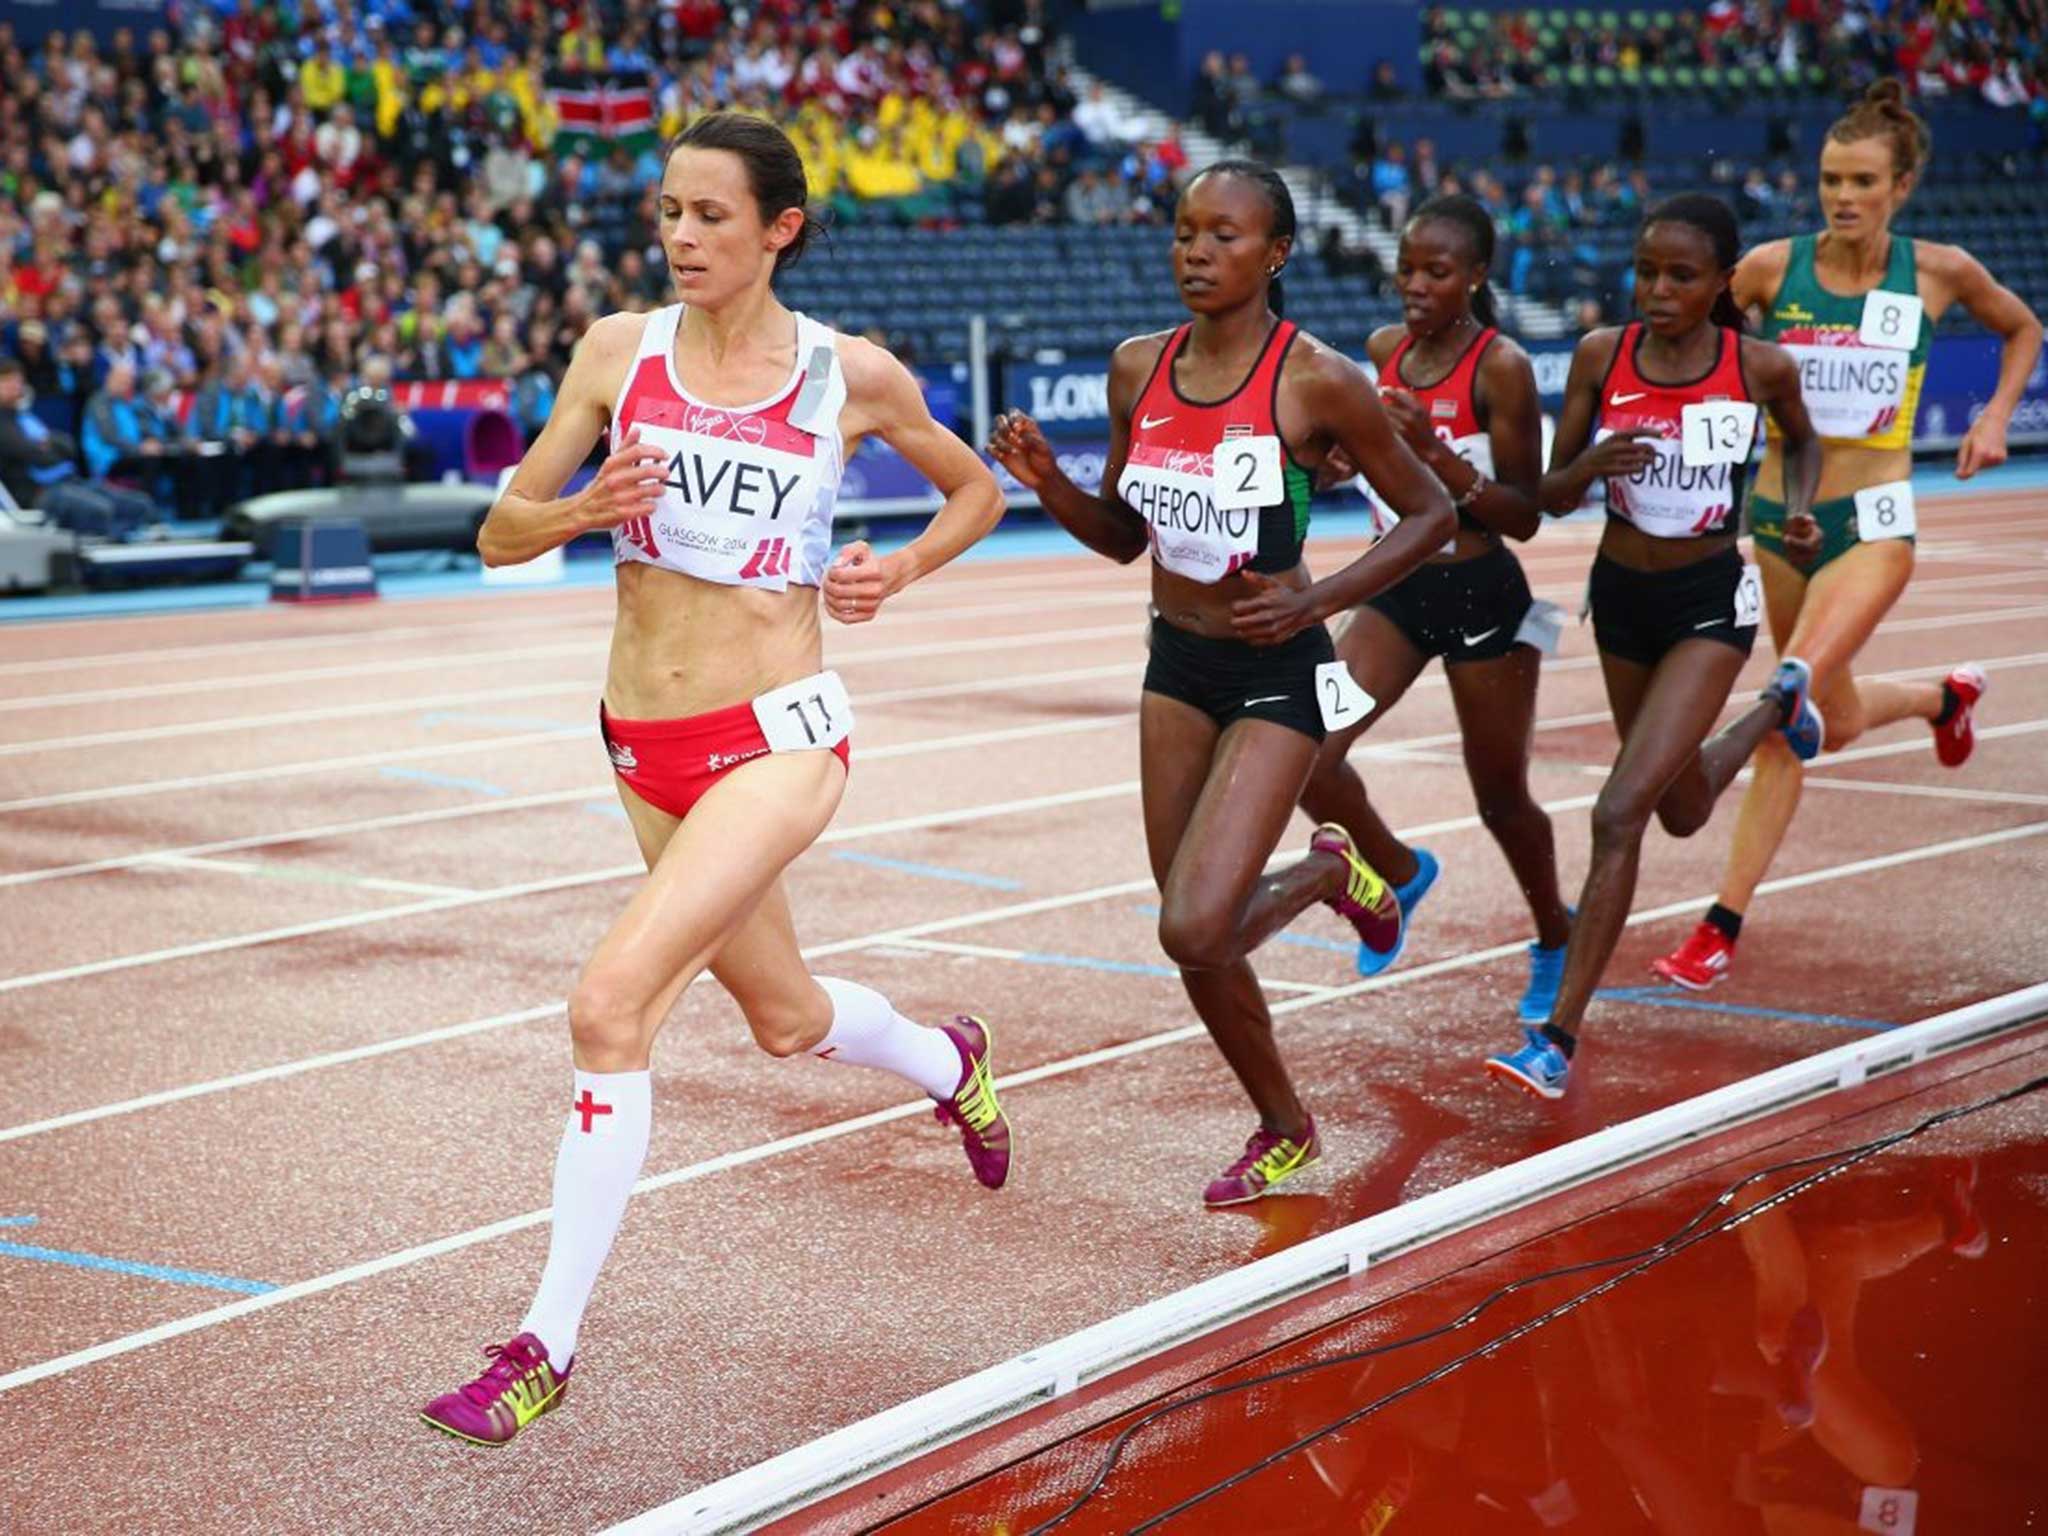 Leading lady: Jo Pavey sets the pace in the 5,000m before being overtaken by the Kenyans with 600 metres to go